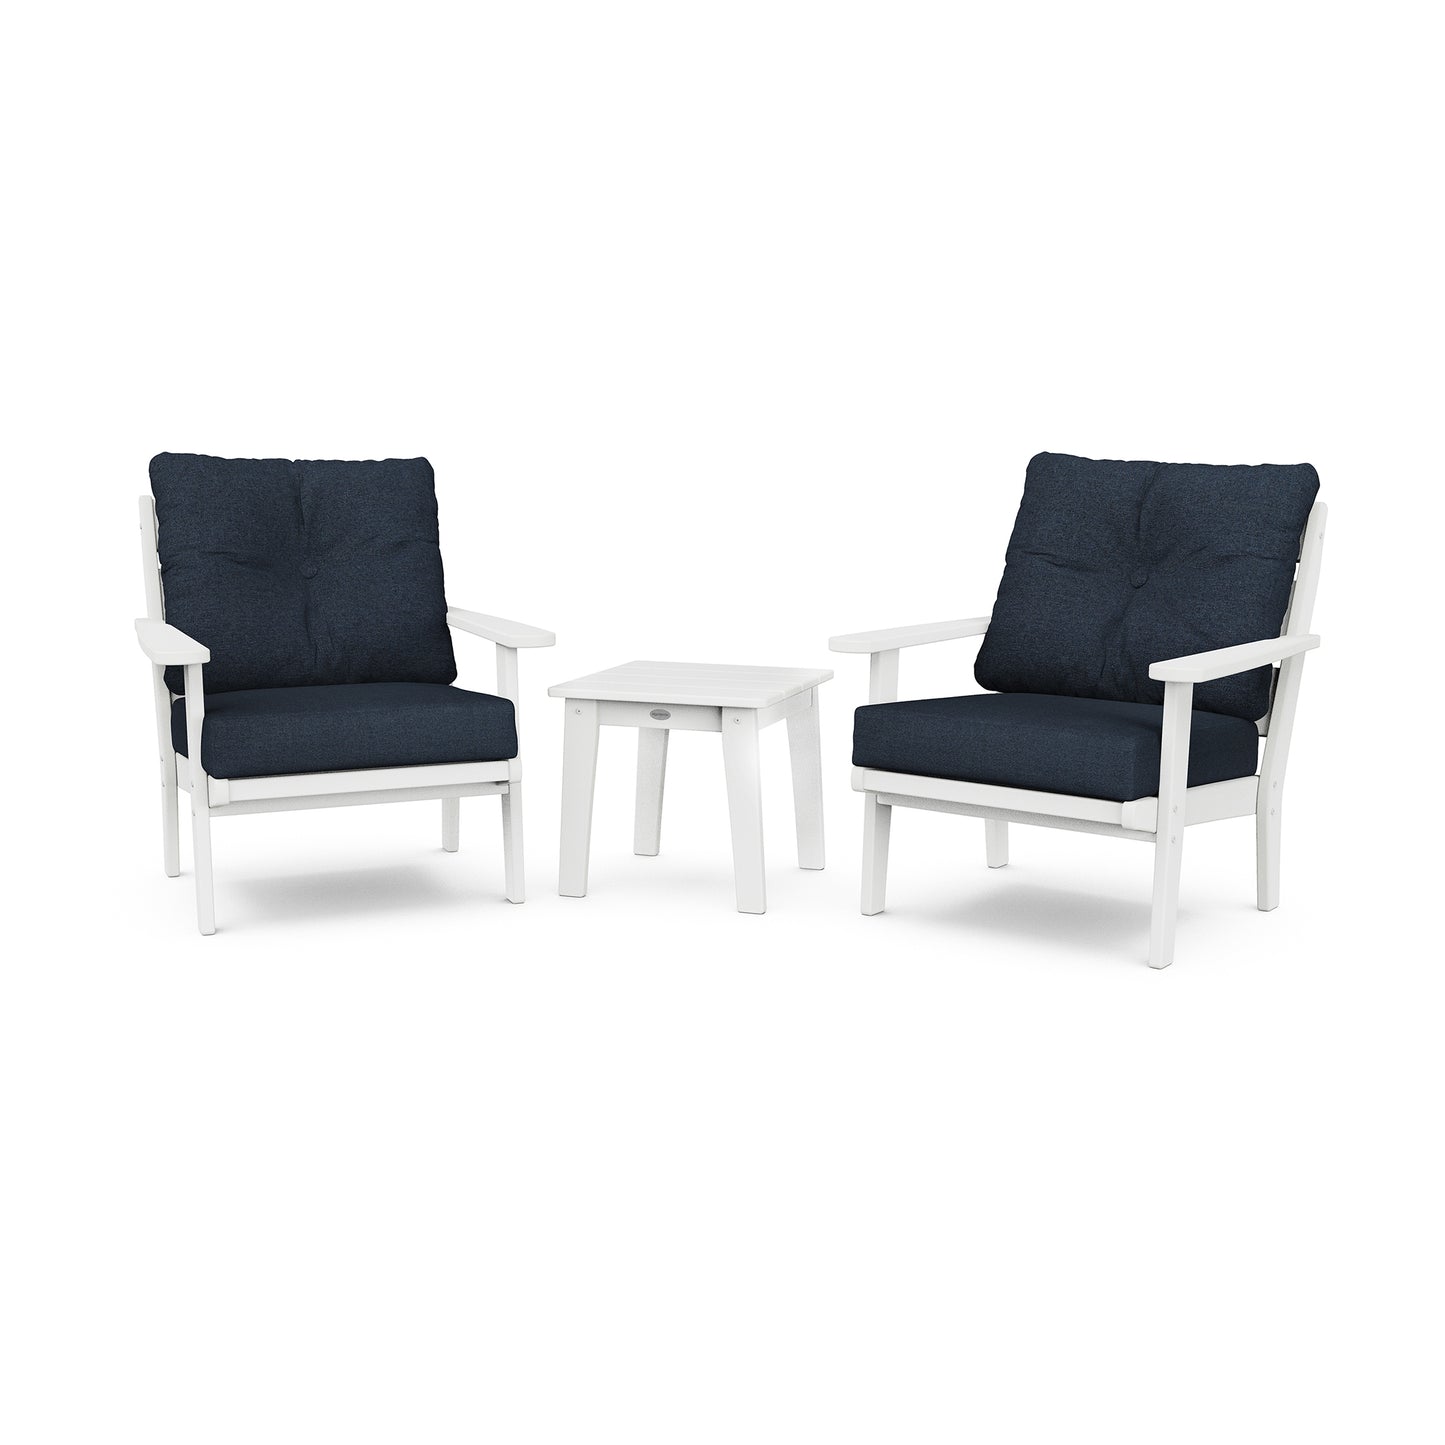 Two white POLYWOOD Lakeside 3-Piece Deep Seating chairs crafted from POLYWOOD® lumber frames with dark blue cushions facing forward, accompanied by a small white square side table between them, set against a white background.